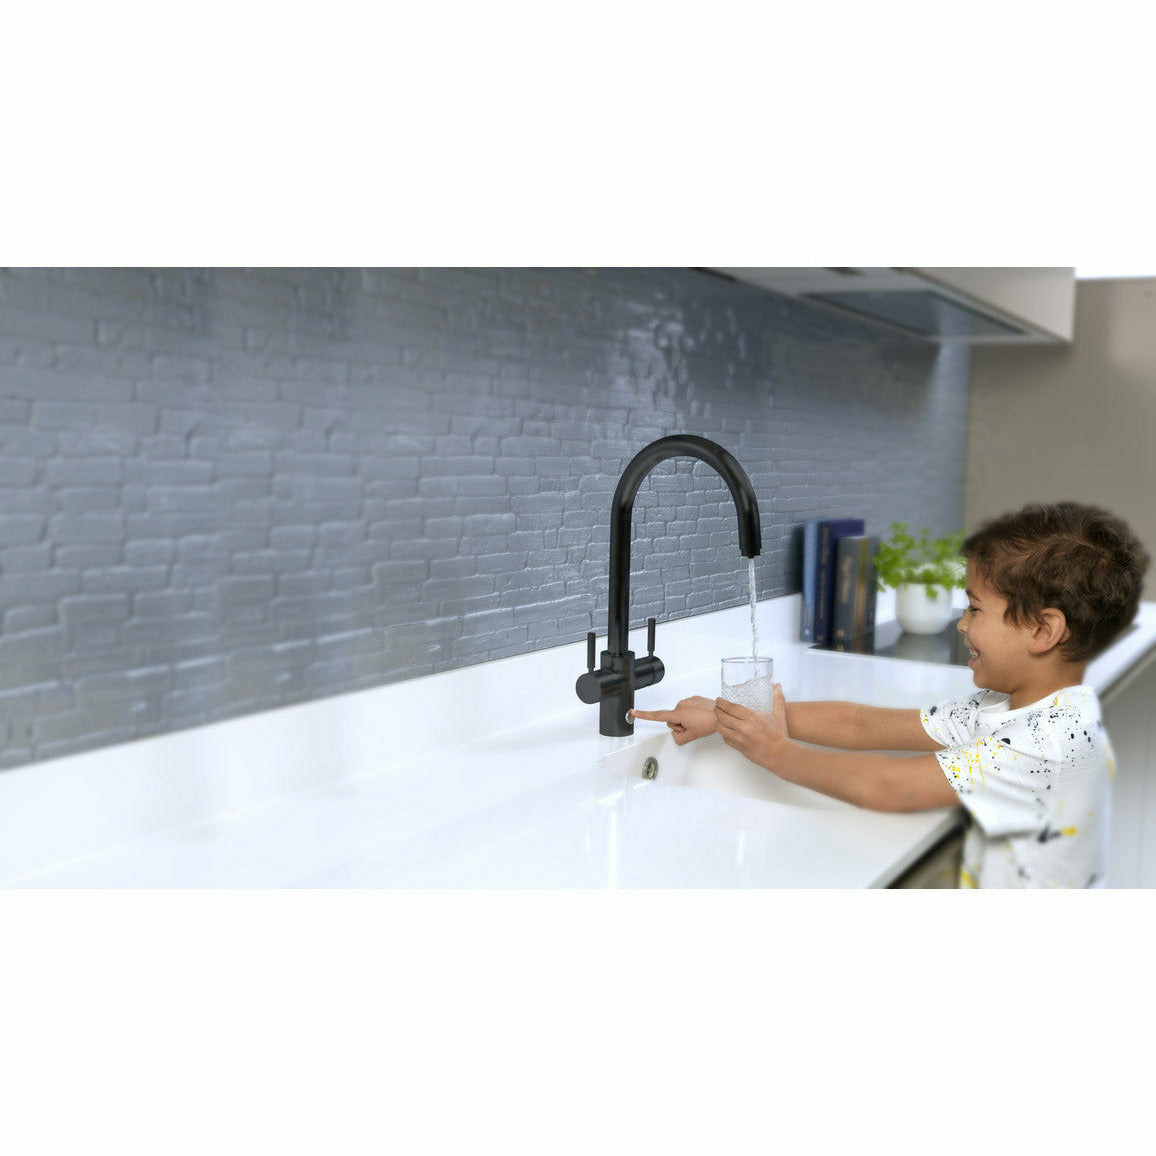 InSinkErator 4 in 1 Touch Boiling Water Tap J Shape Spout - The Tap Specialist